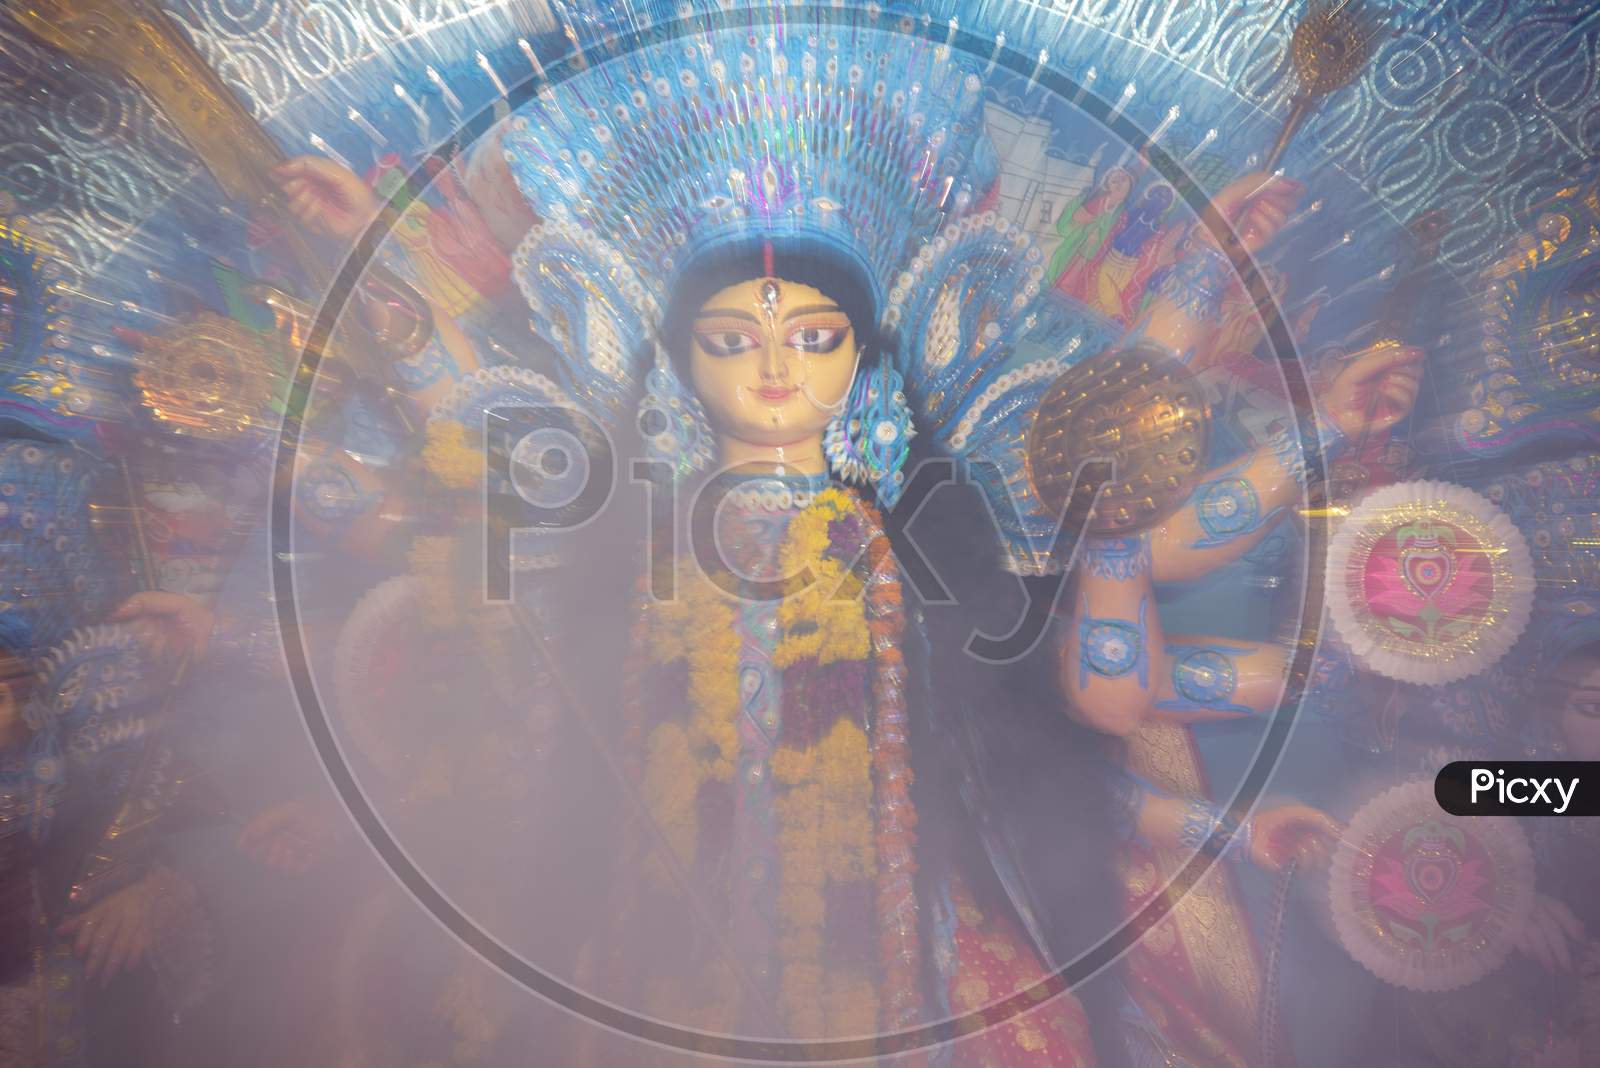 Goddess Durga Devi Statue covered in smoke during Dussehra